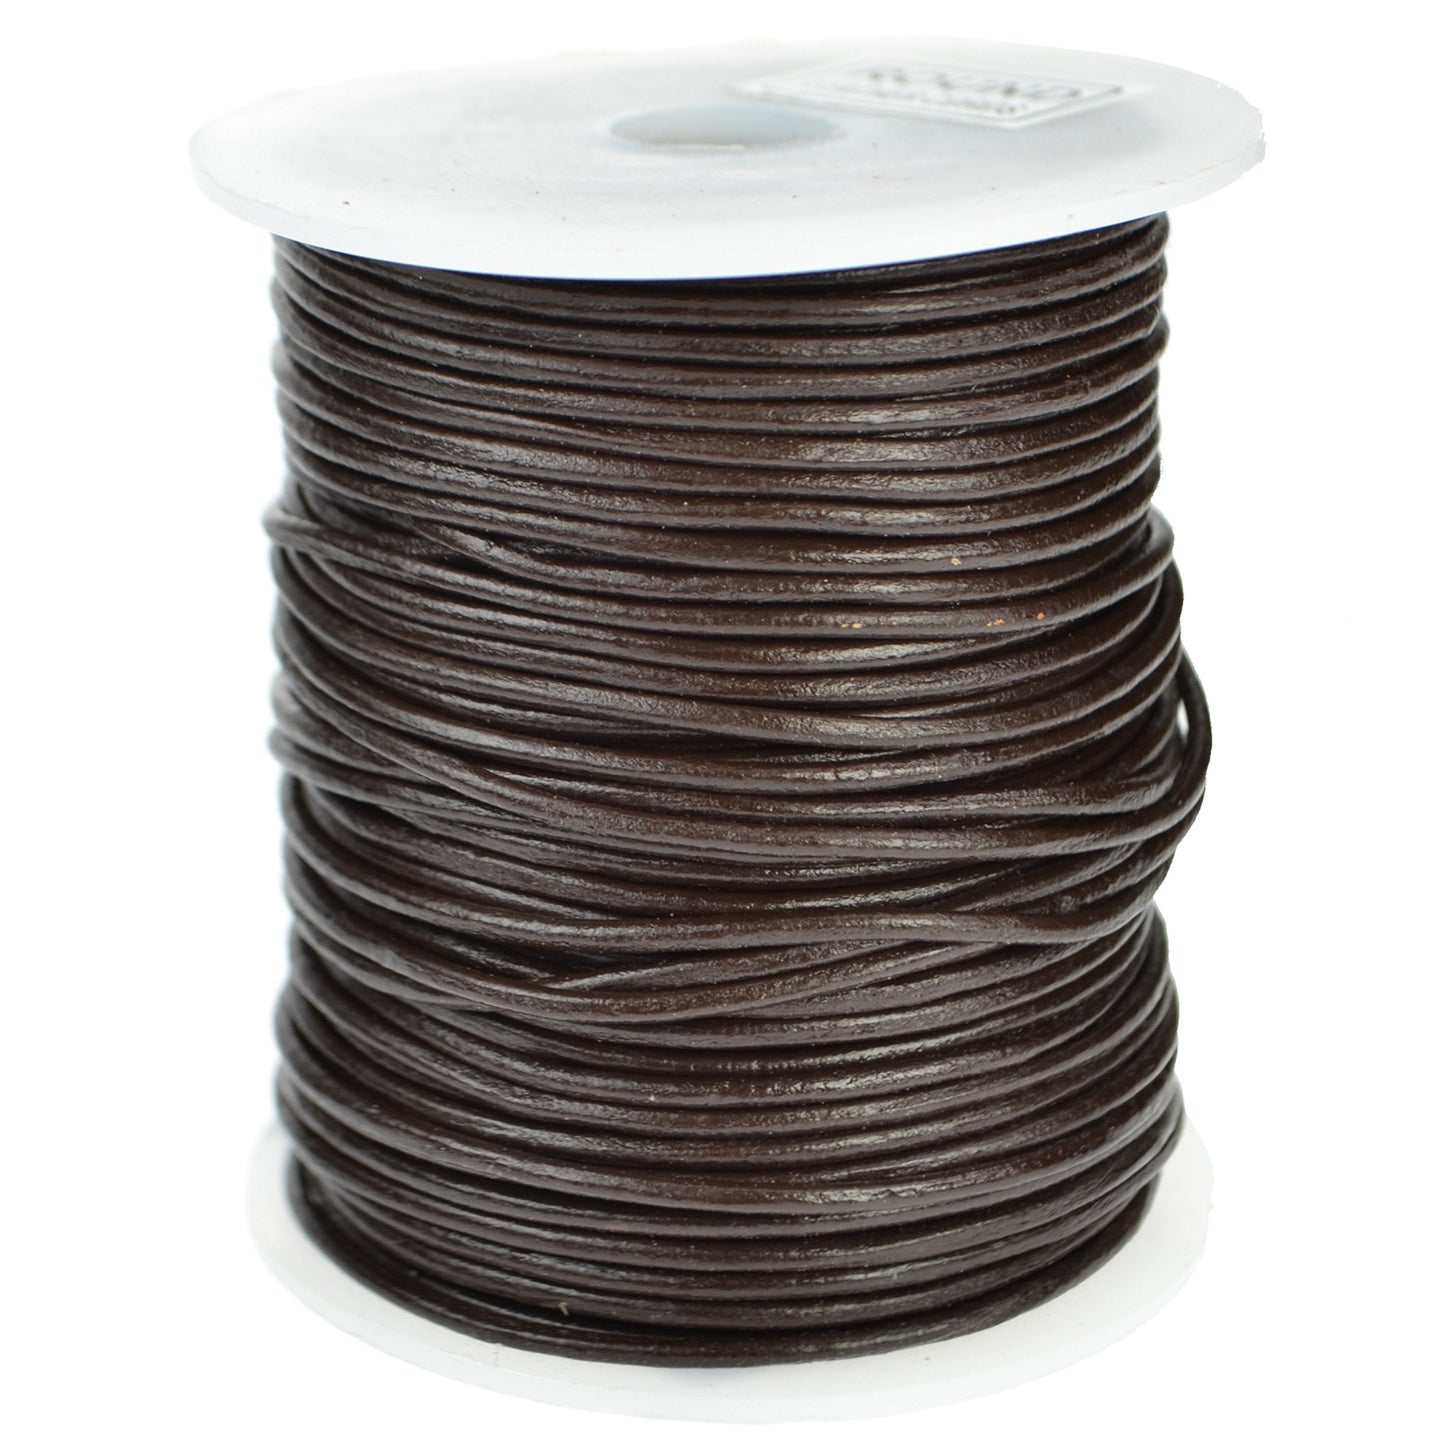 Thin Round Leather Shoe Laces - Polished Dark Brown 2mm